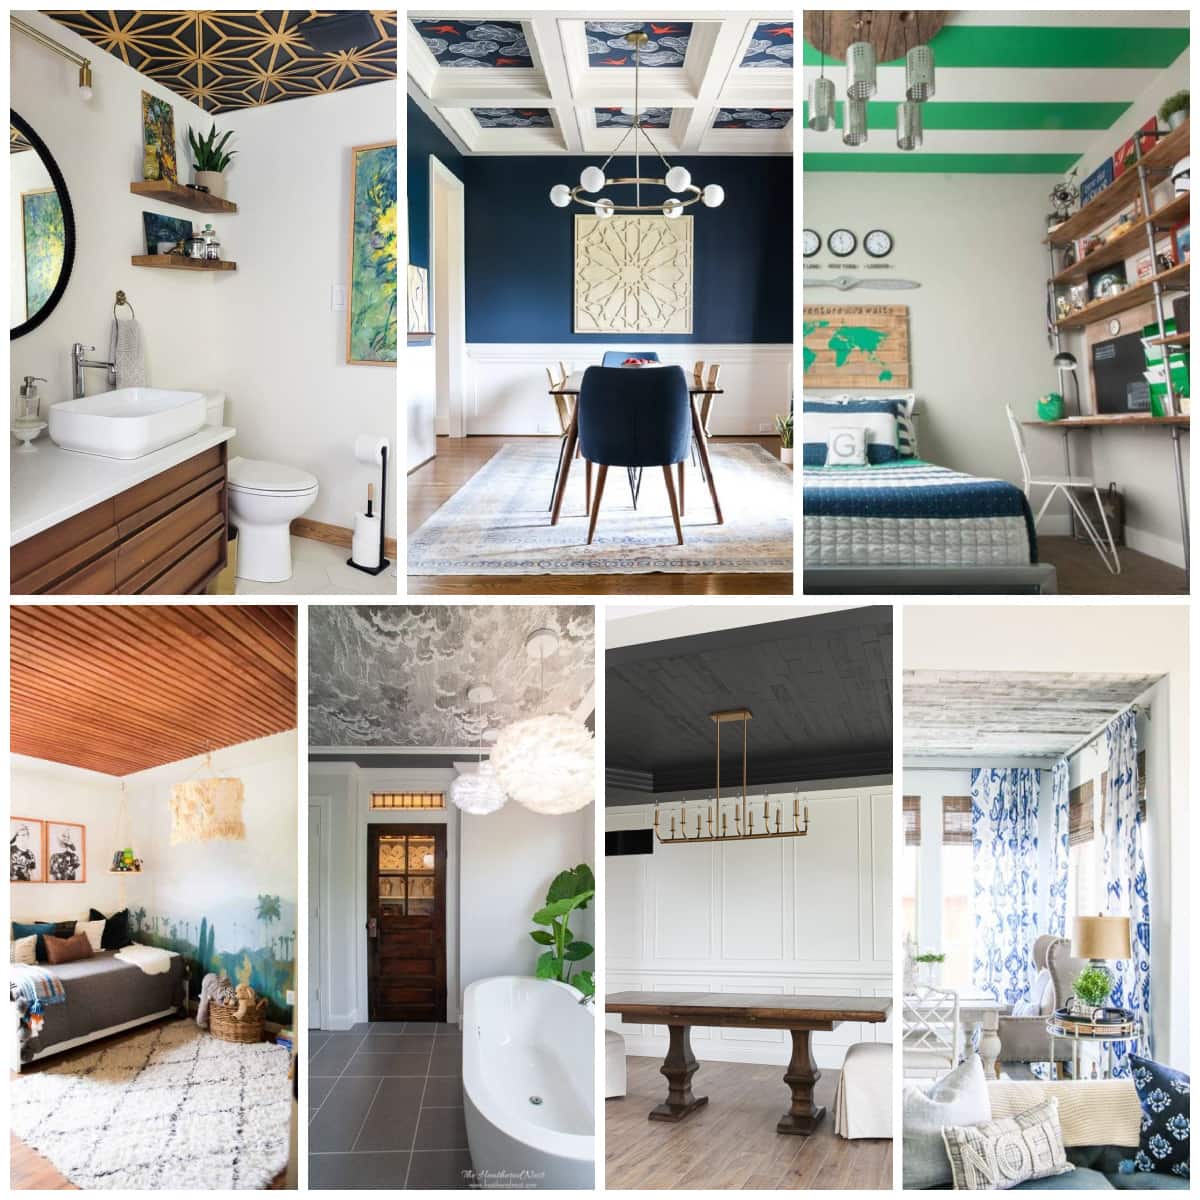 collage of unique ceiling design ideas for dining room, bedroom, bathroom, and living rooms